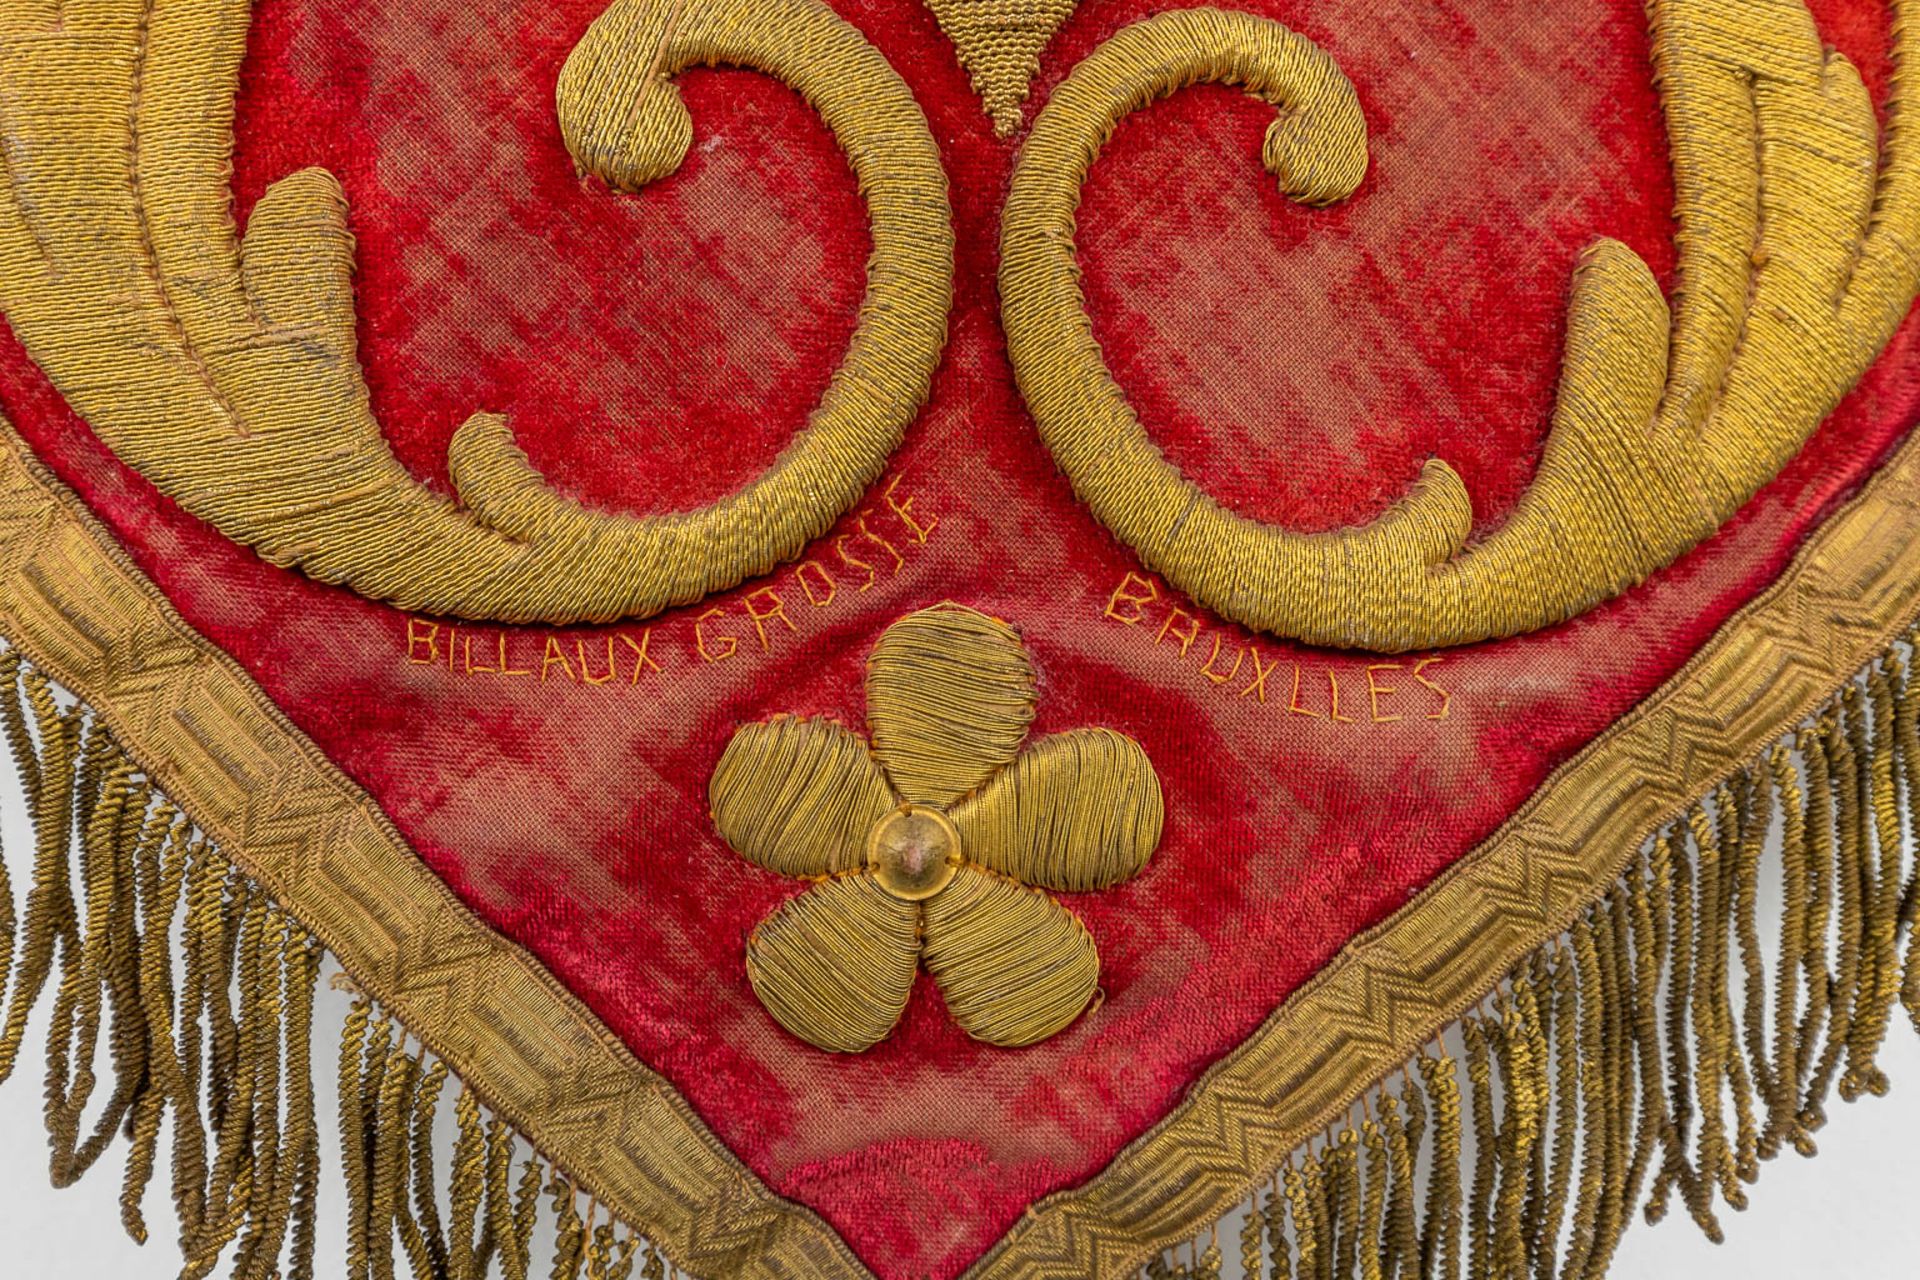 An antique banner, 'Harmonie Saint Germain, Couvin', and used in the front of a marching orchestra. - Image 5 of 10